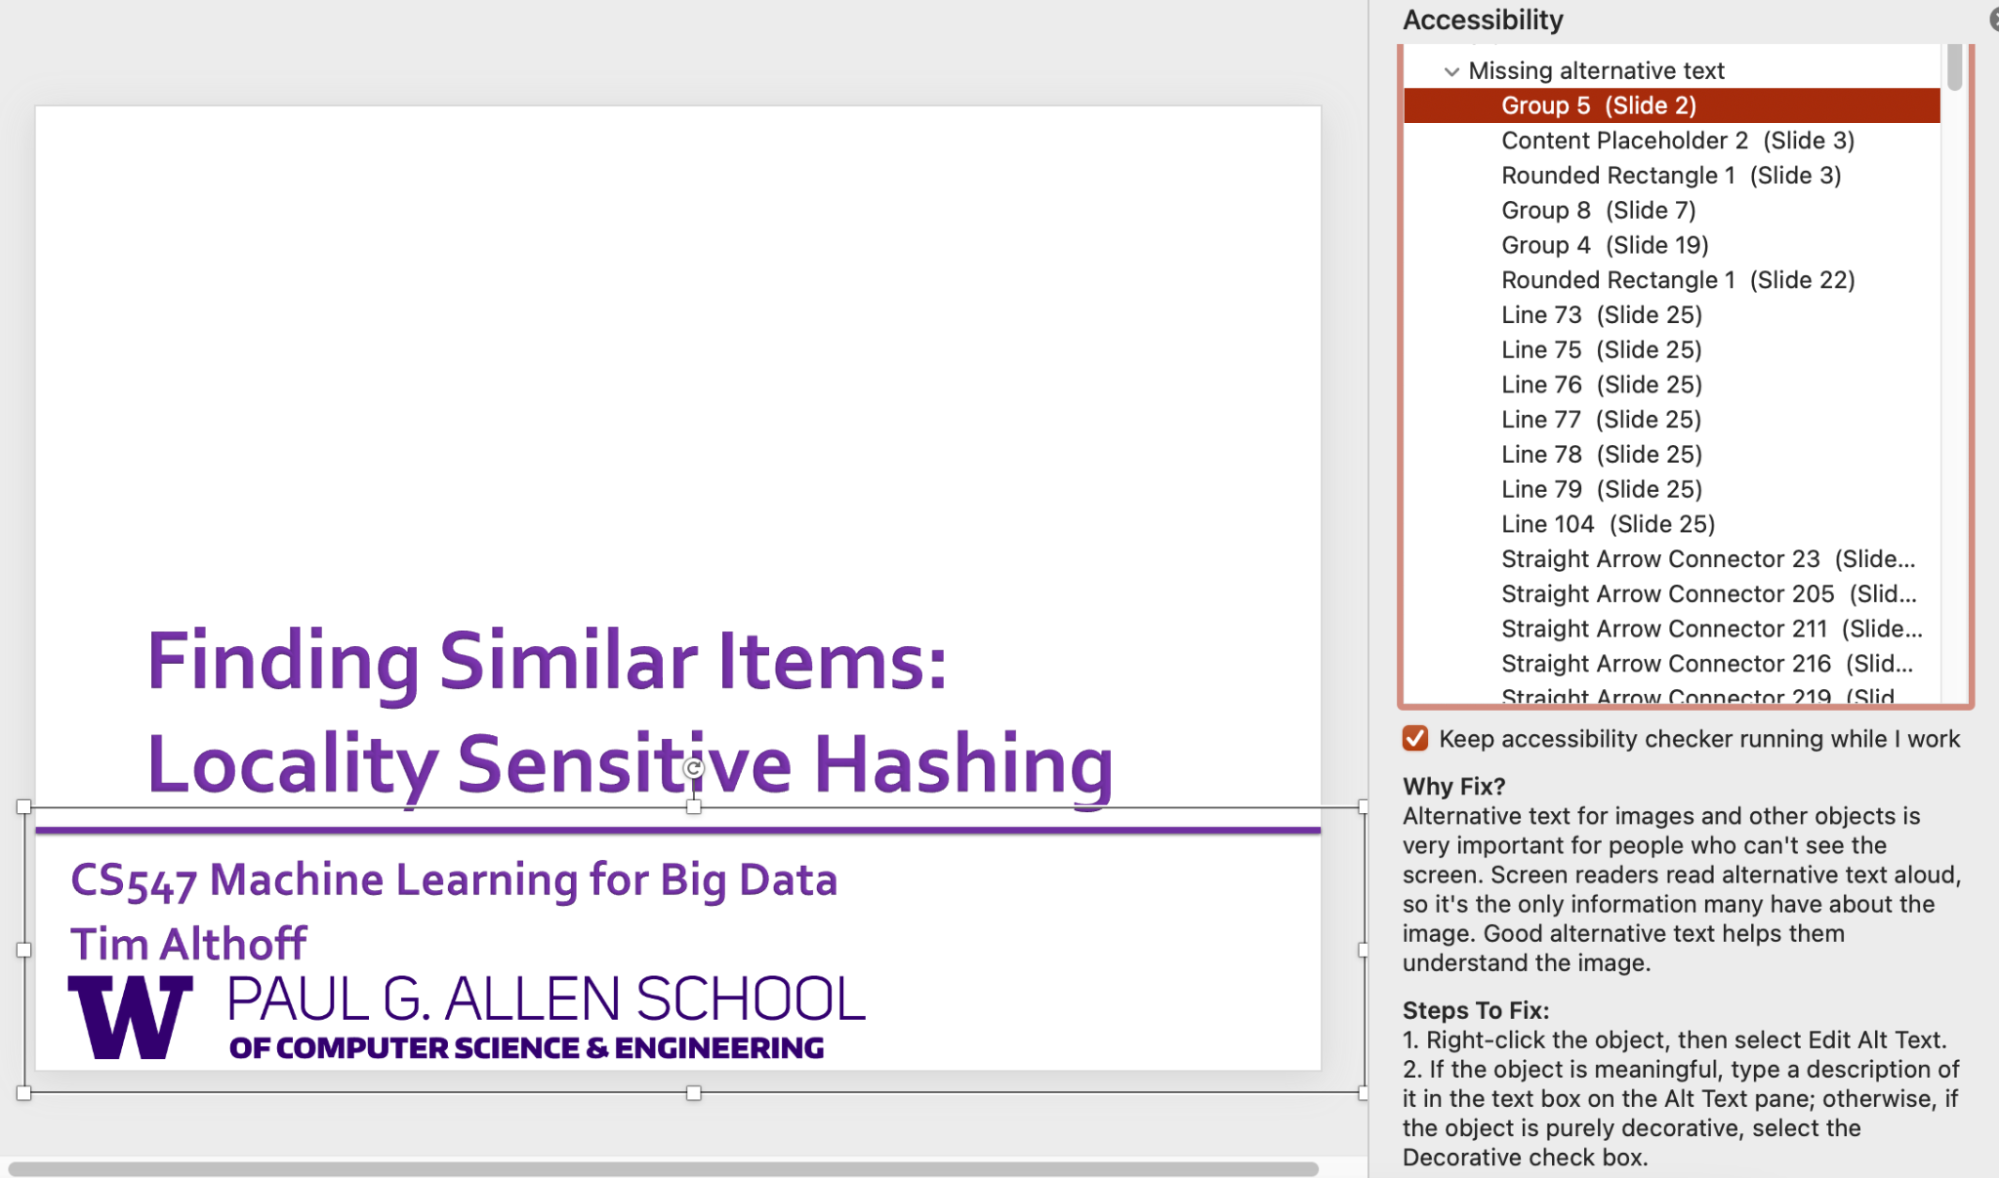 Screenshot of the PowerPoint interface with a slide on the left, titled 'Finding Similar Items: Locality Sensitive Hashing'. The subtitle reads 'CASE547 ML for Big Data Tim Althoff'. The slide also includes the Paul G Allen School of Computer Science logo. On the right, the Accessibility Panel is open, showing detailed information for each 'missing alternative text' error for elements on the current slide.